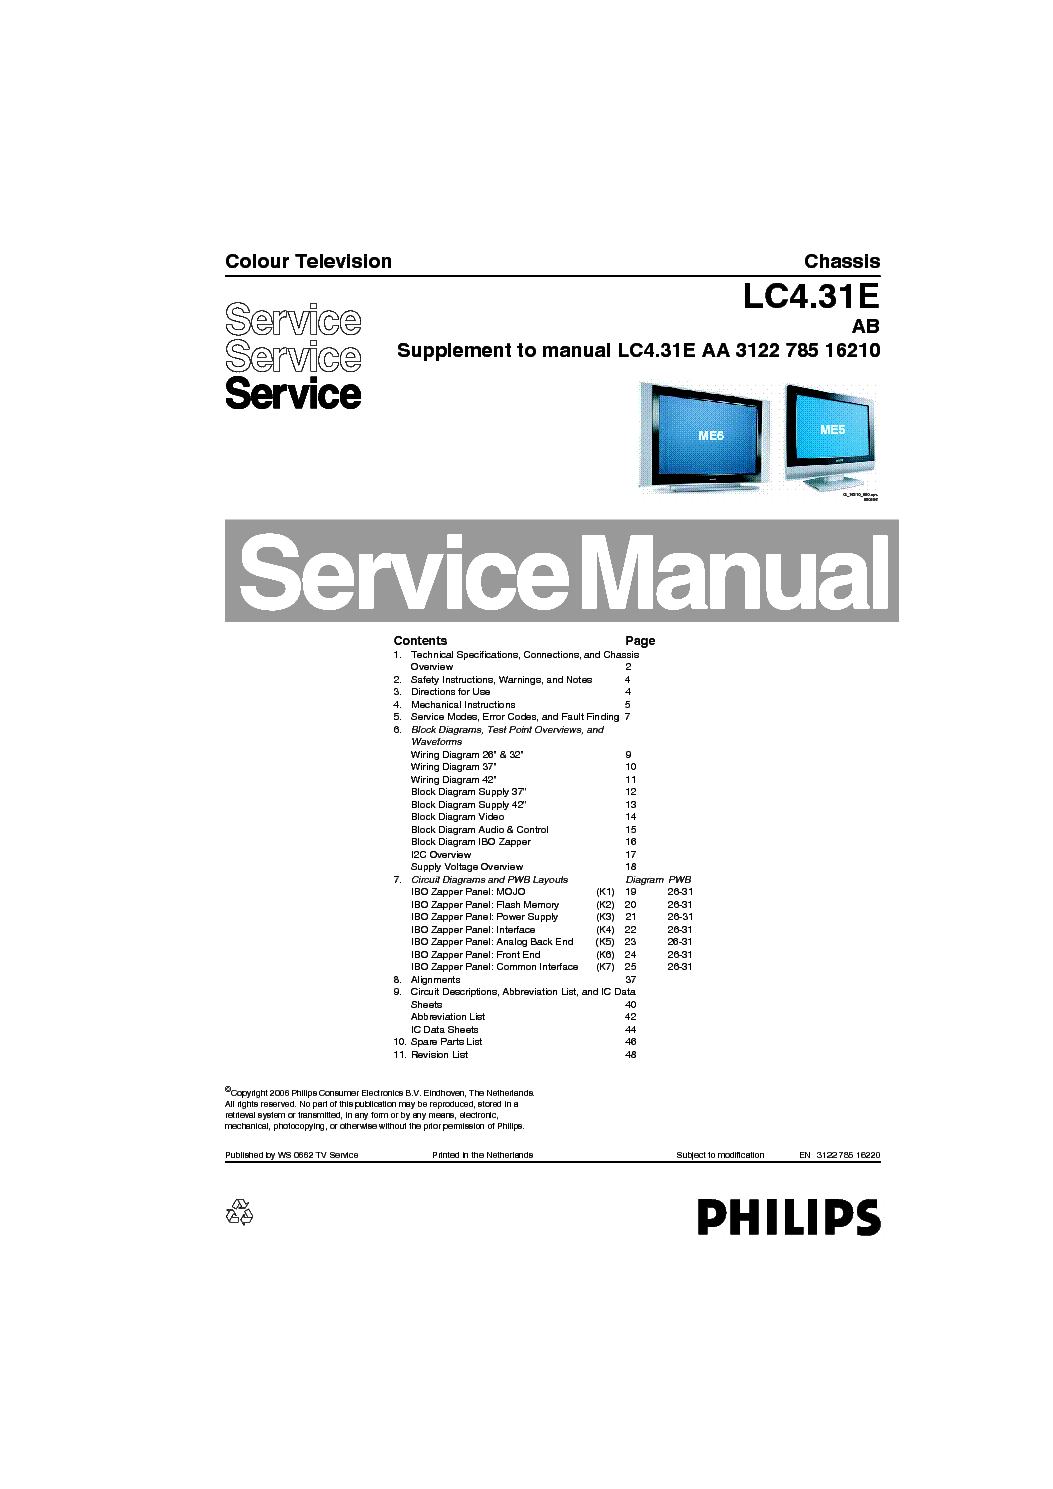 PHILIPS AA3122-LC4.31EAB SM service manual (1st page)